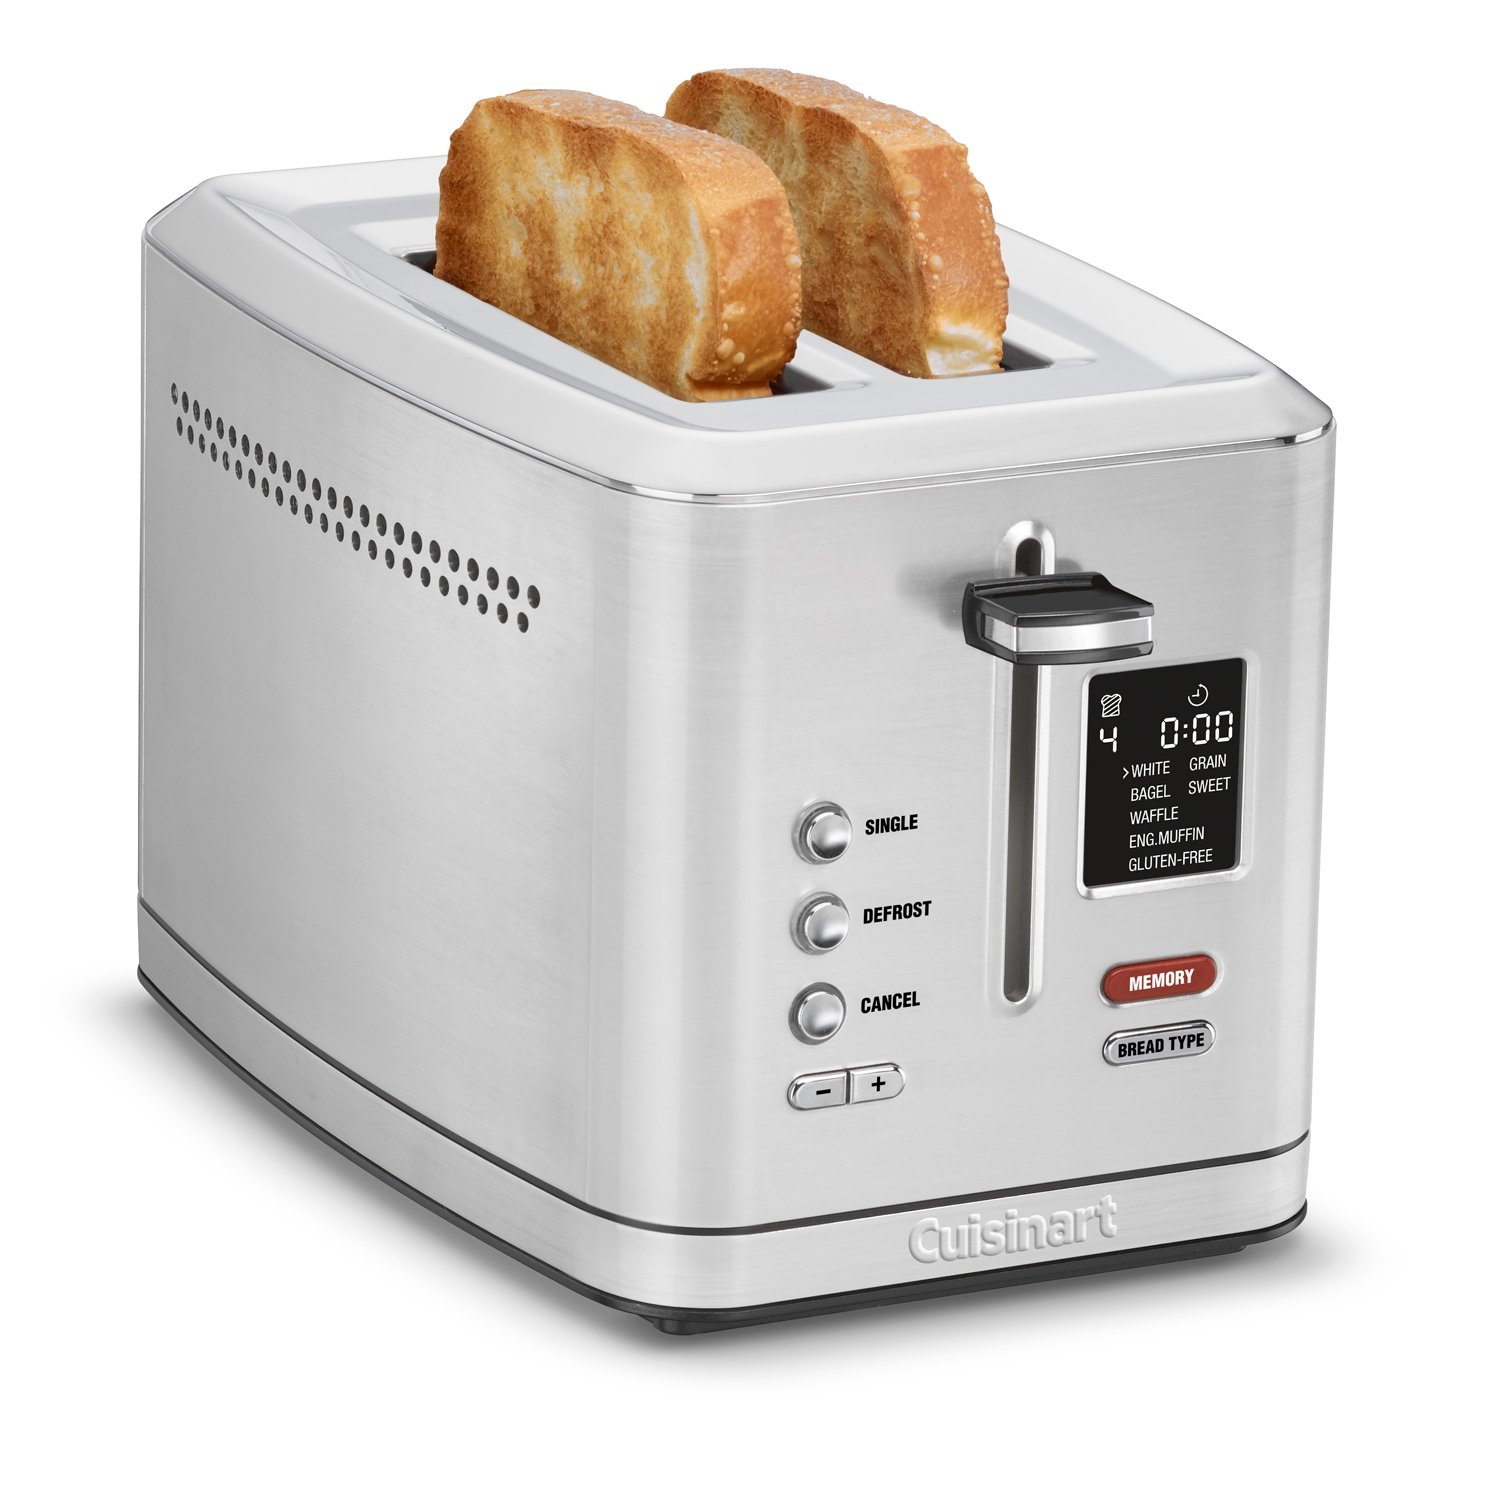 Toaster Parts & Accessories - Free Shipping - Cuisinart.com